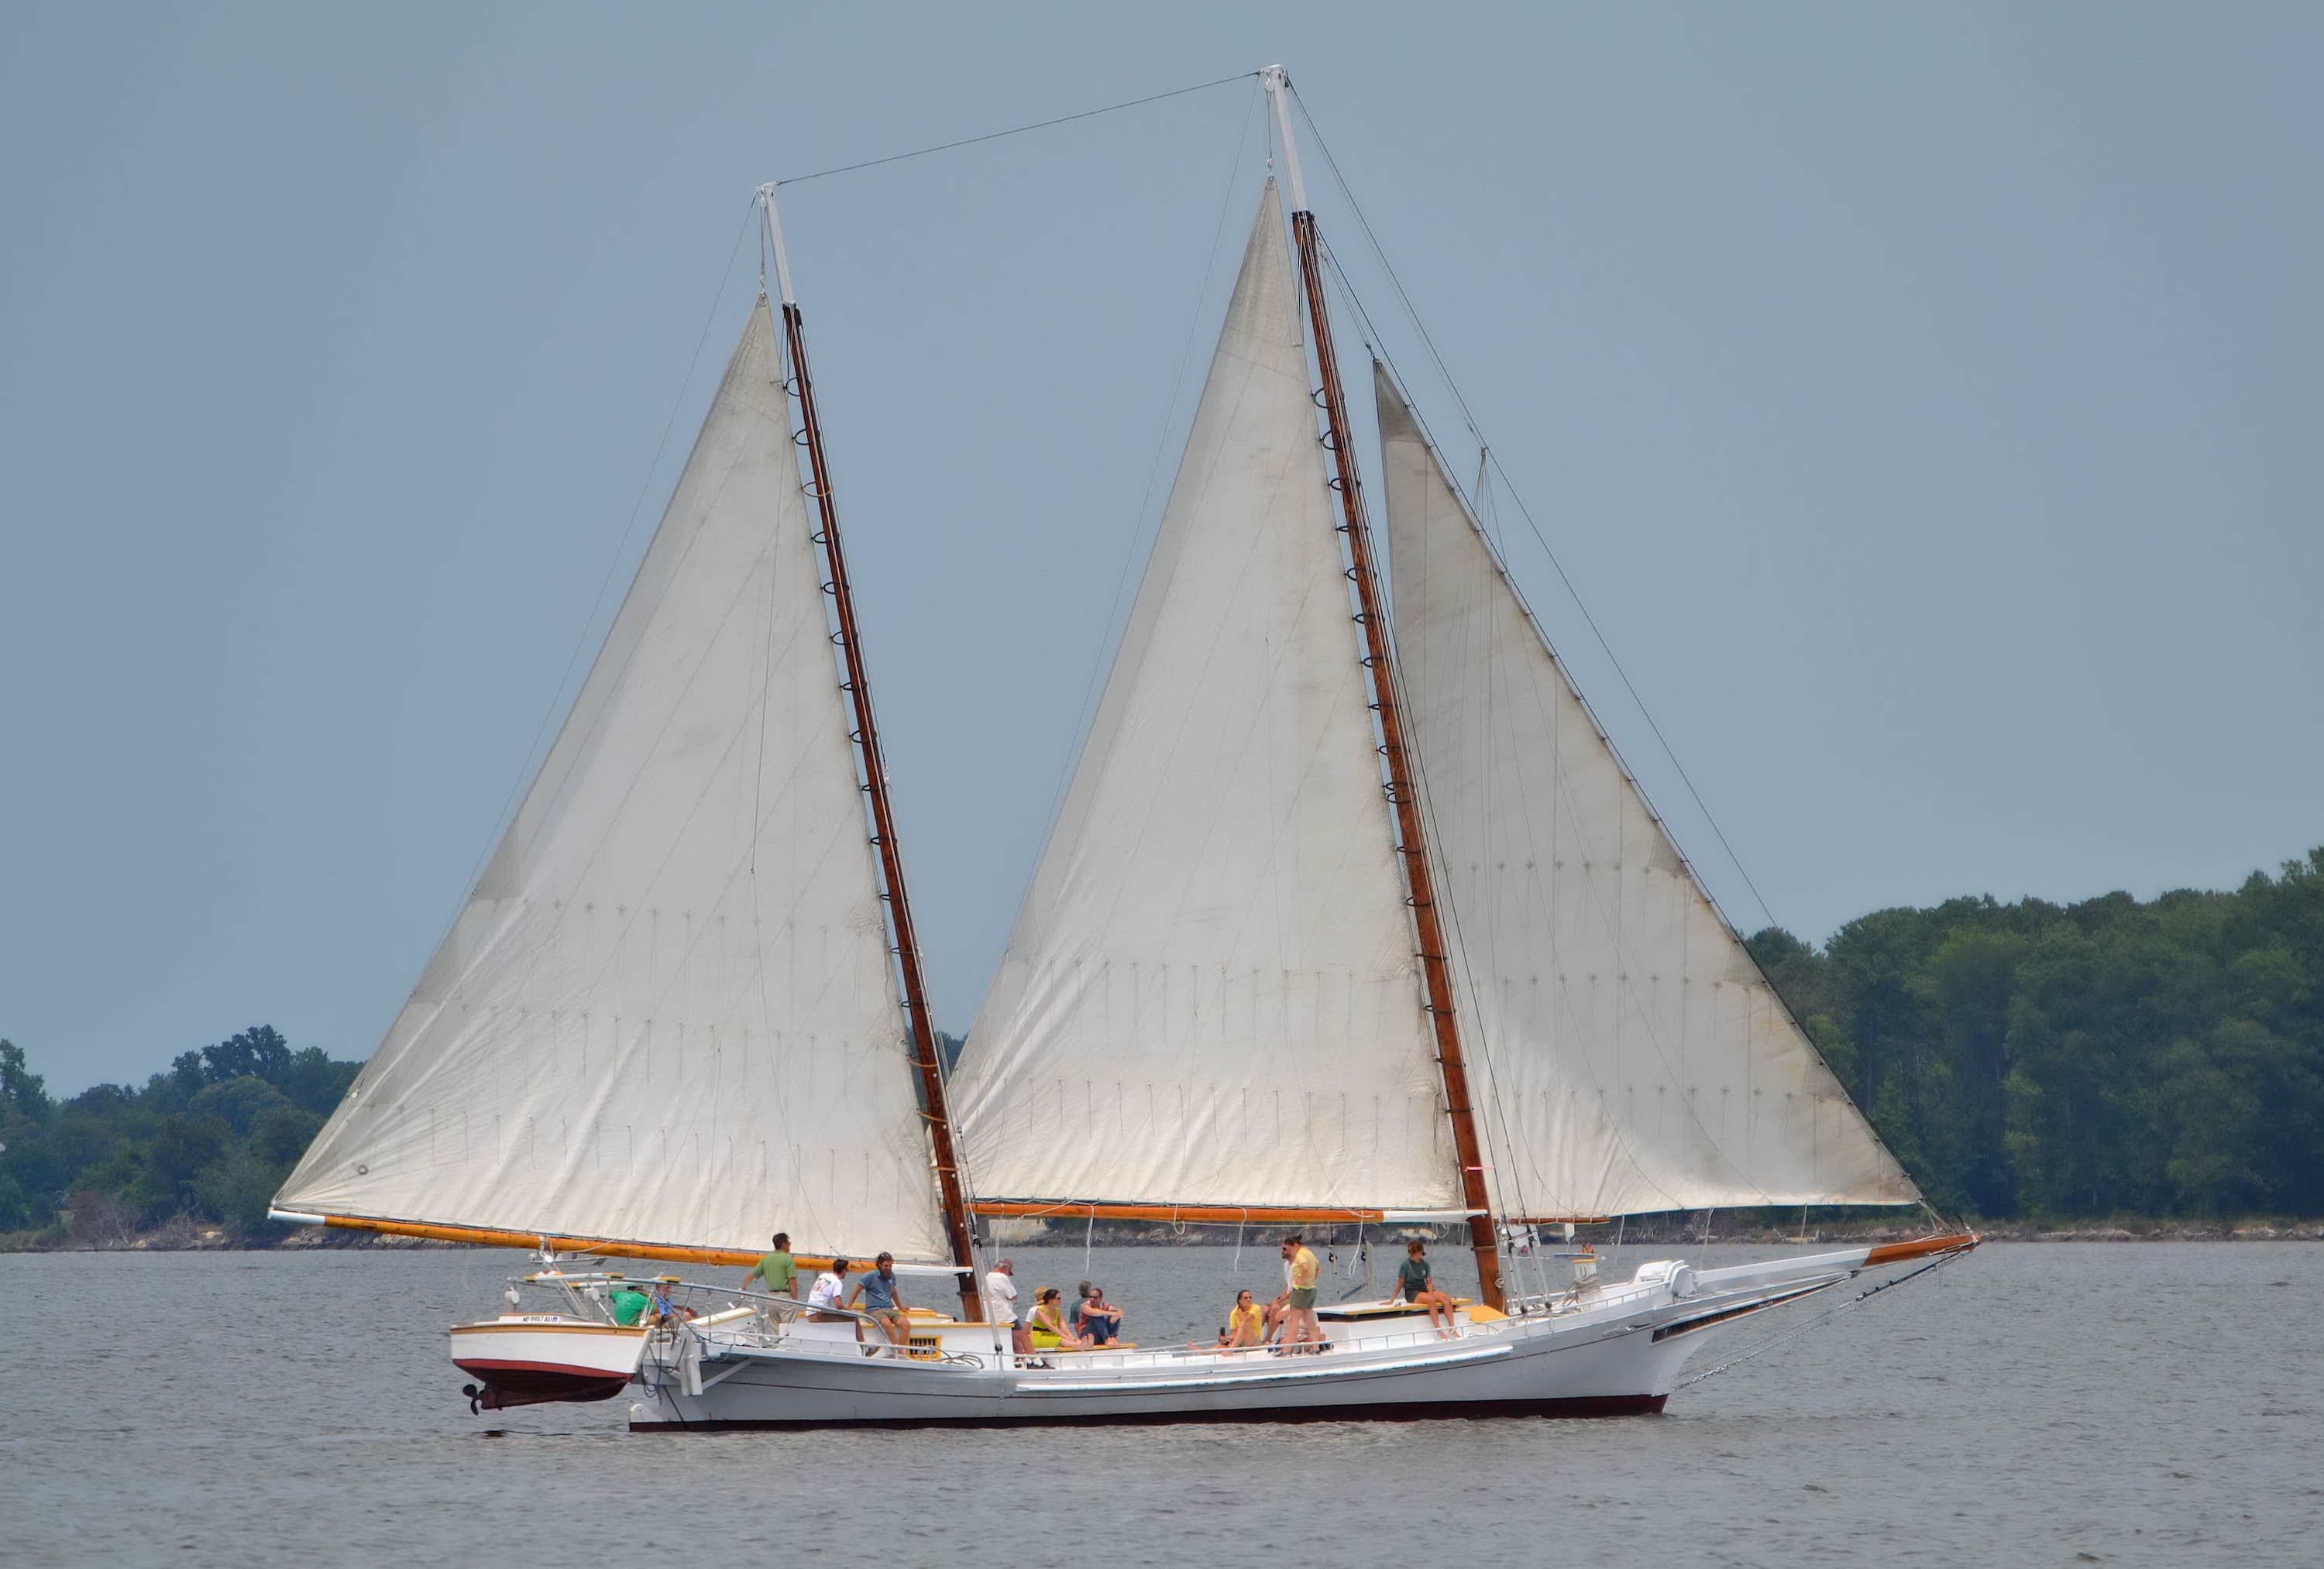 1889 bugeye Edna Lockwood docking in Colonial Beach during Potomac River Festival